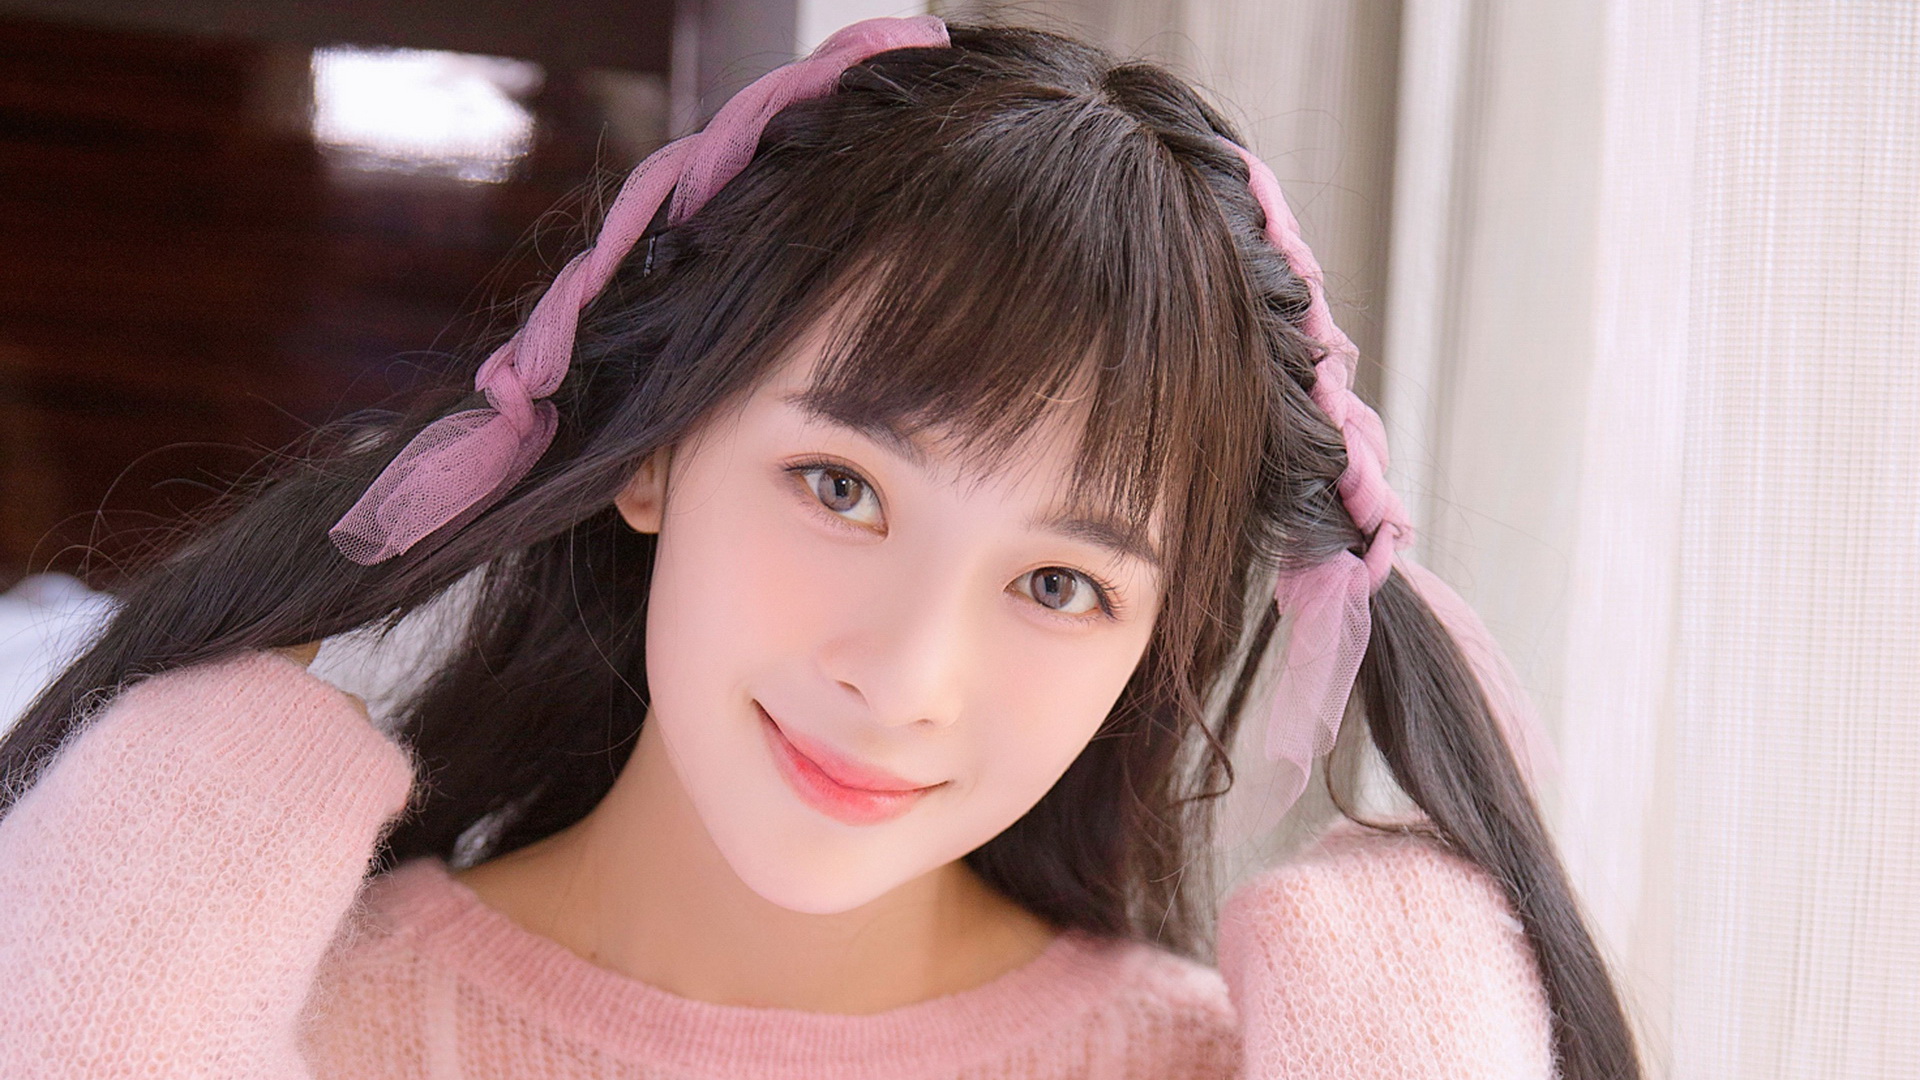 Women Asian Photography Model Brunette Long Hair Hairband Hands In Hair Smiling Pink Sweater Looking 1920x1080